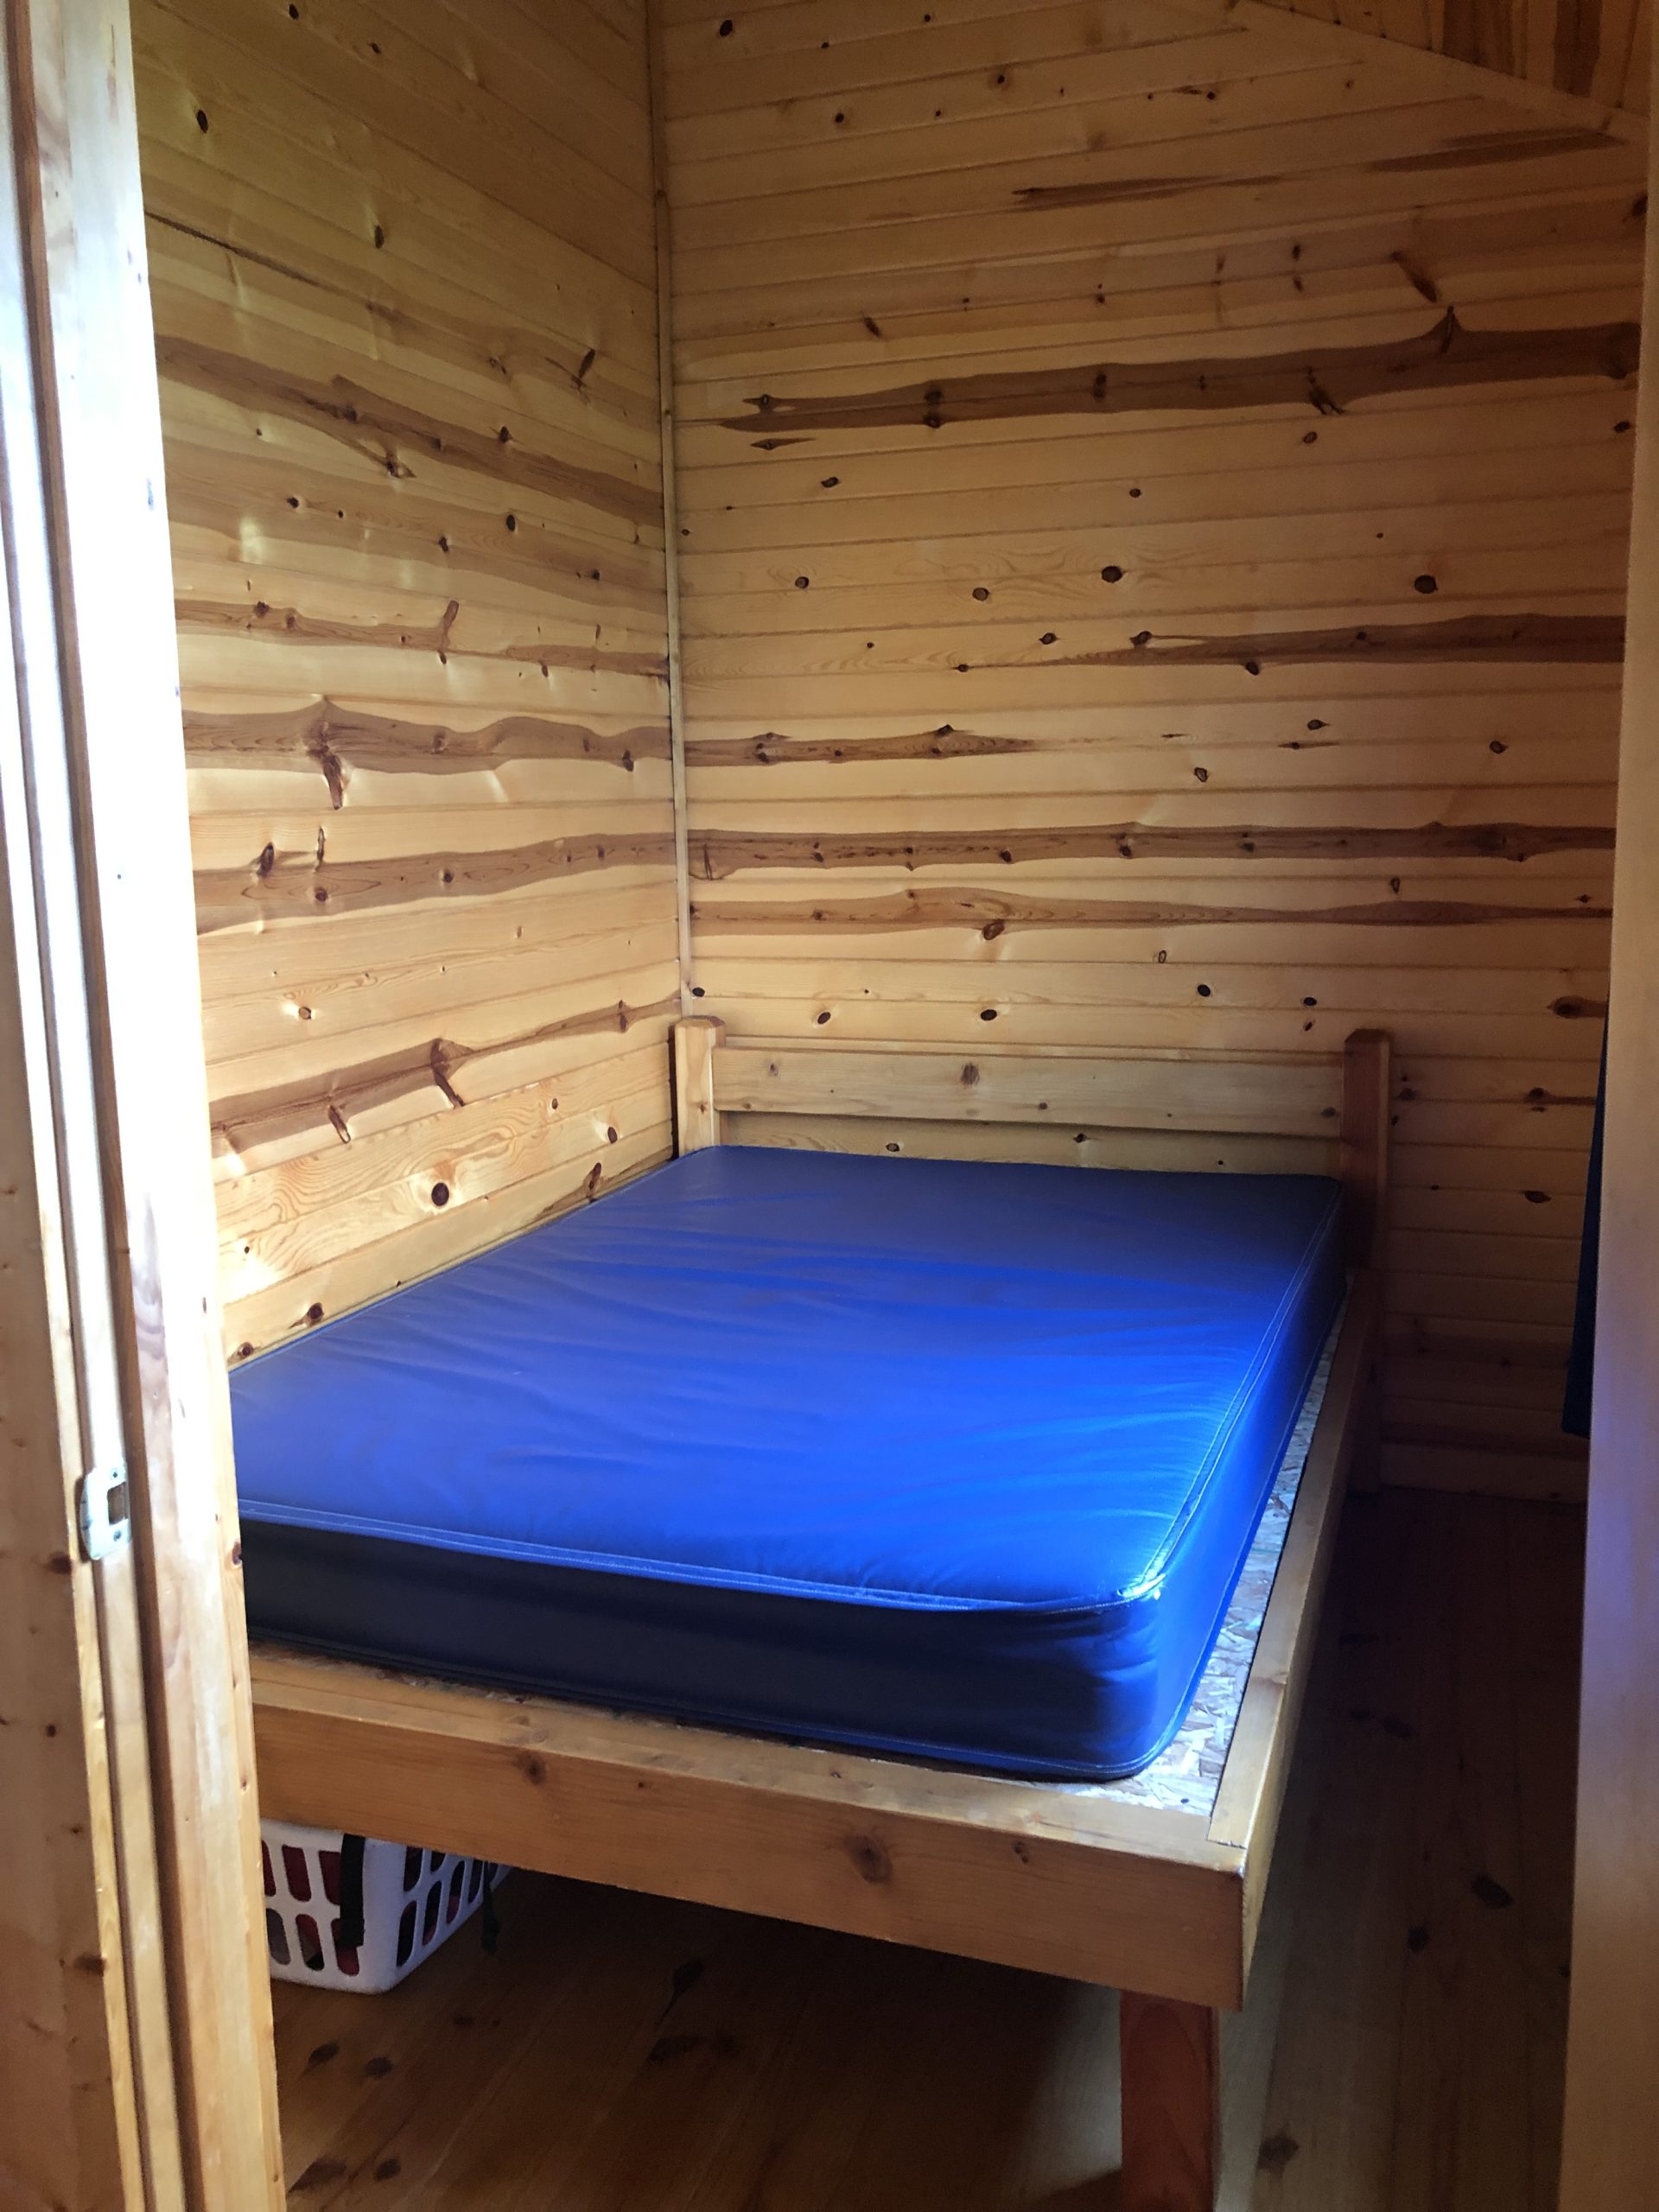 Ionia State Park Cabins - Walleye Bedroom 2